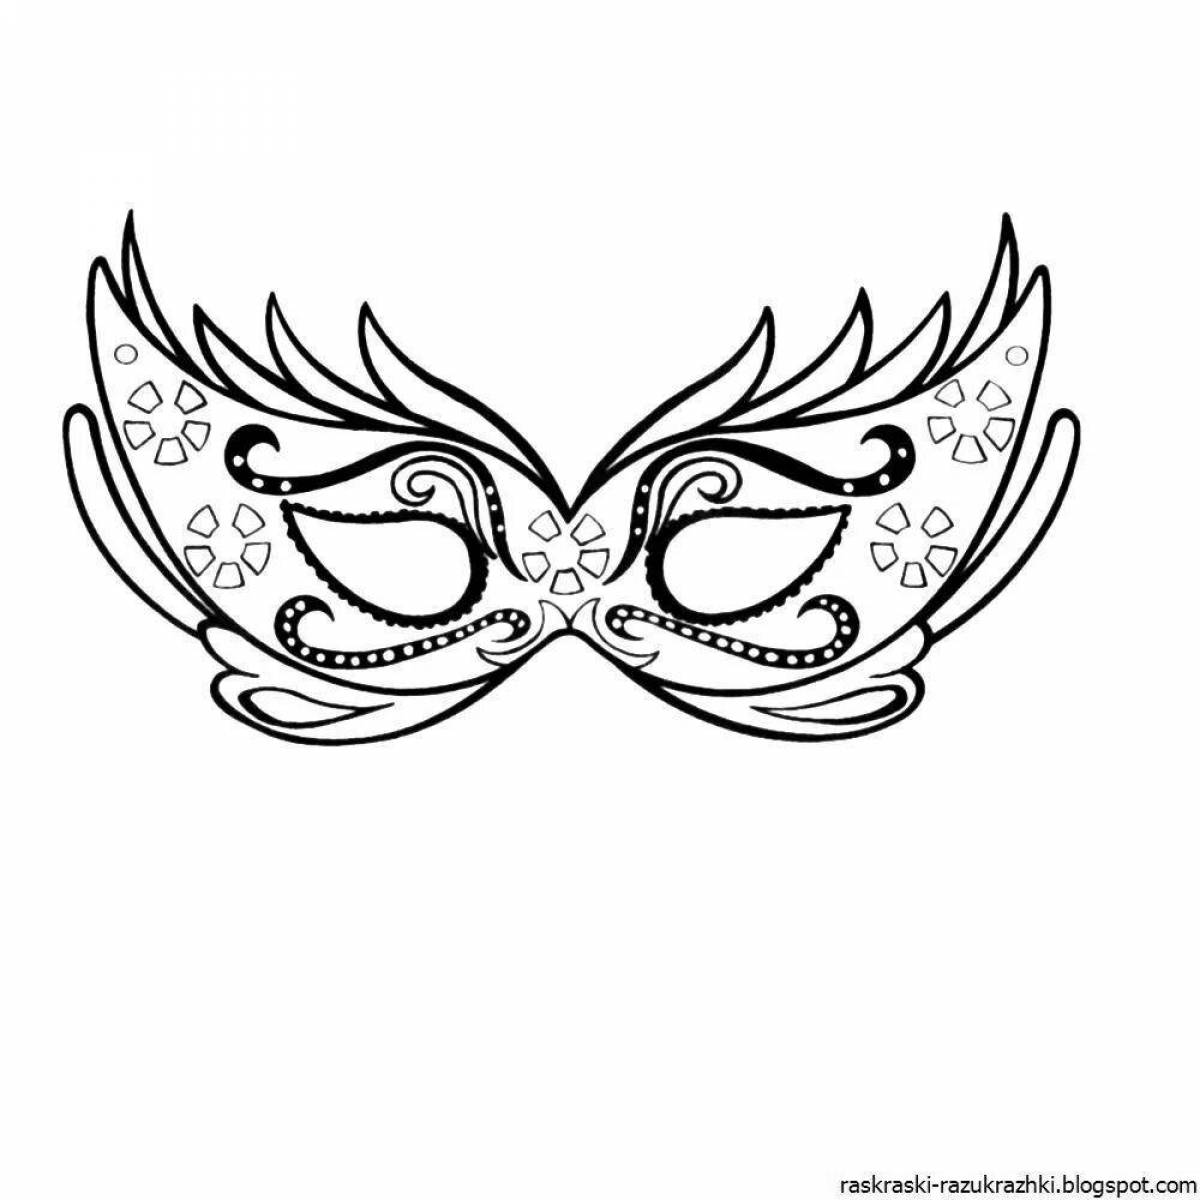 Charming mask coloring page